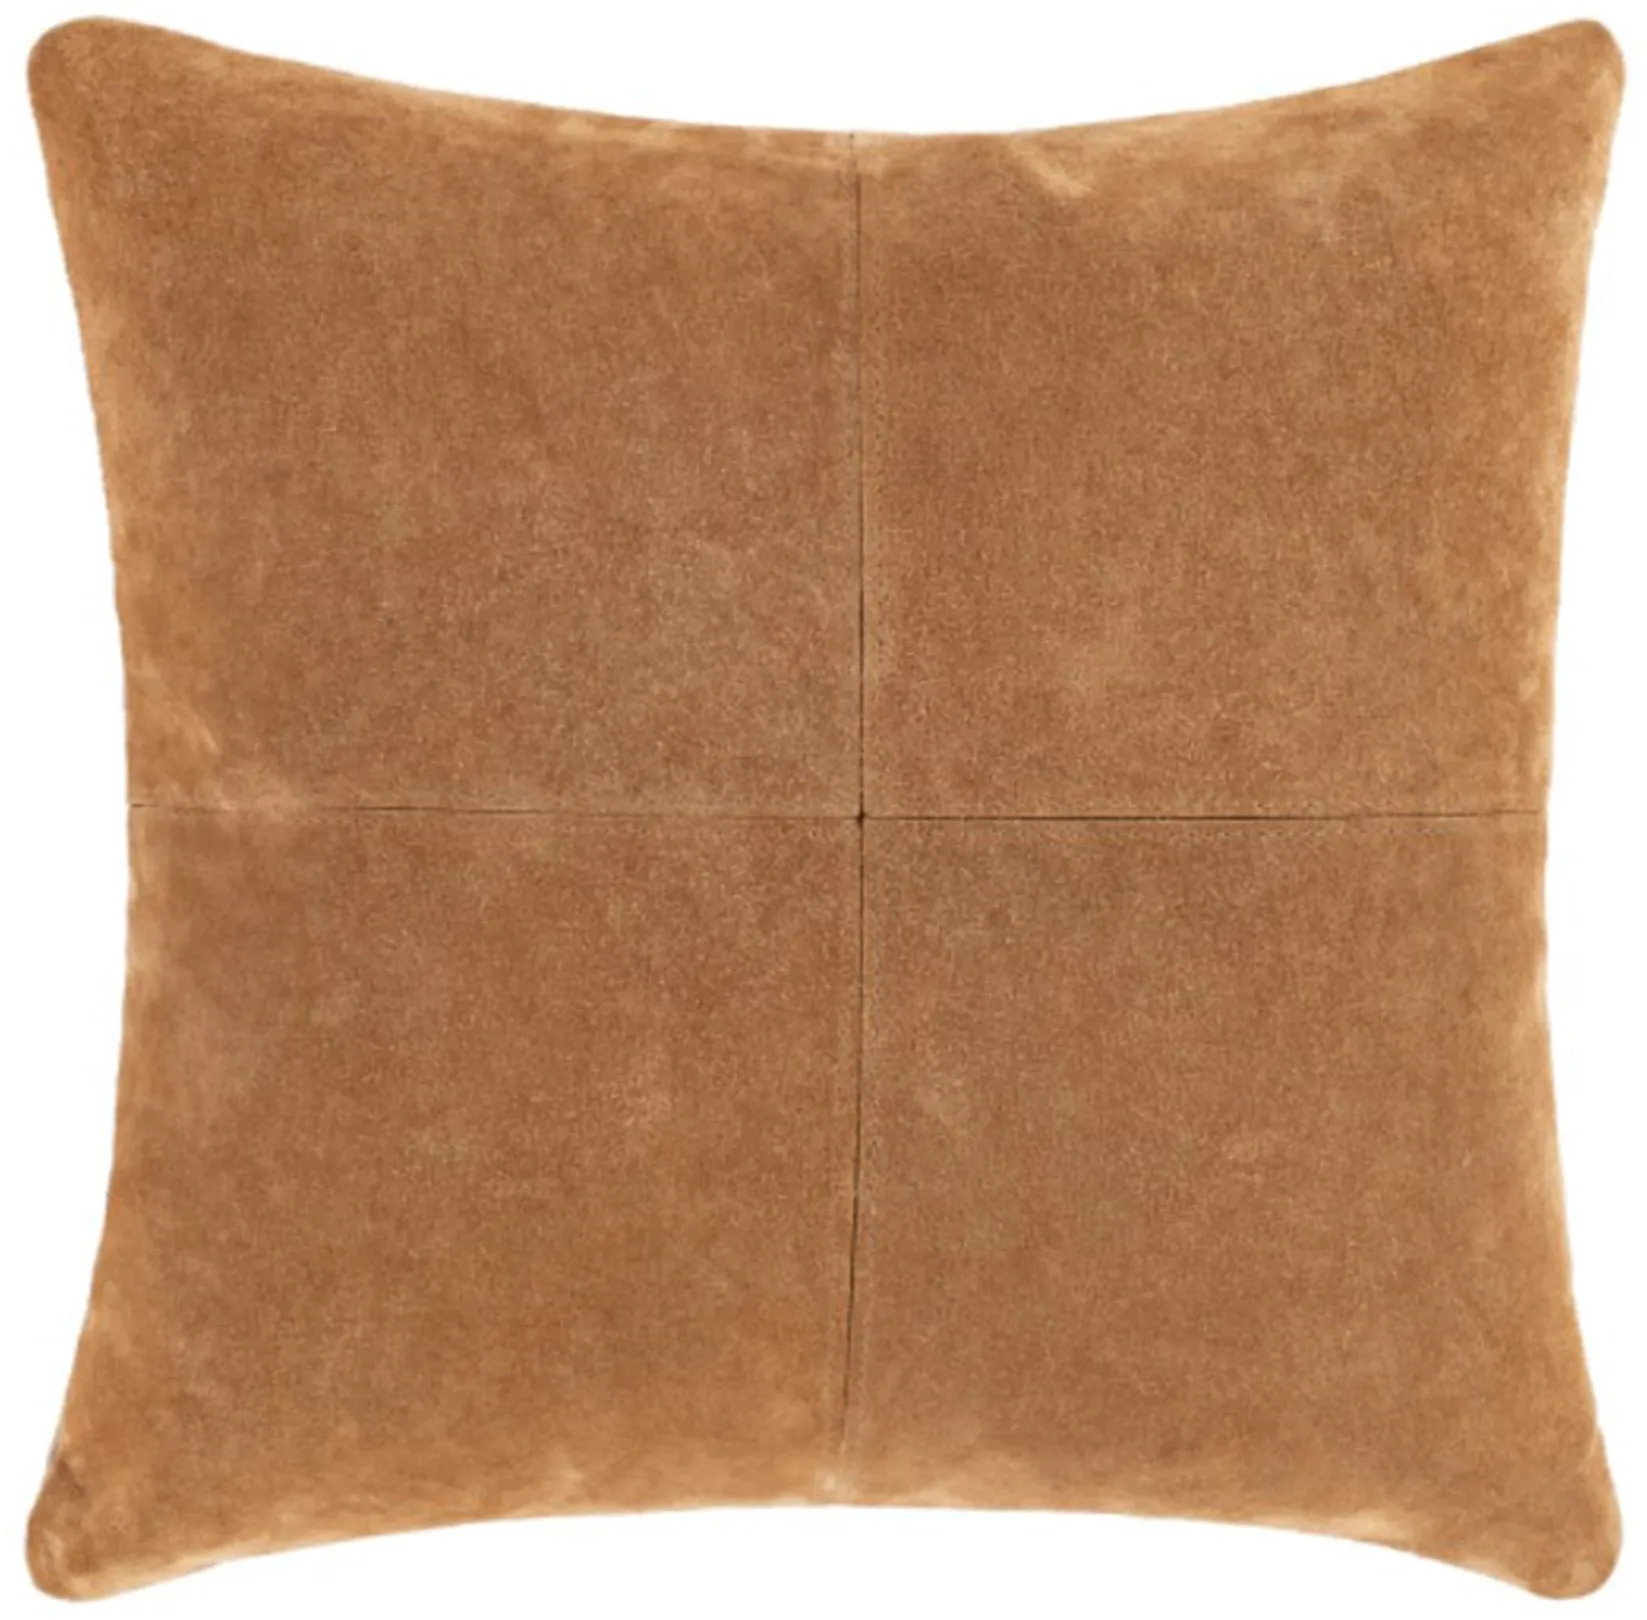 Camel Suede Pillow 20"W x 20"H